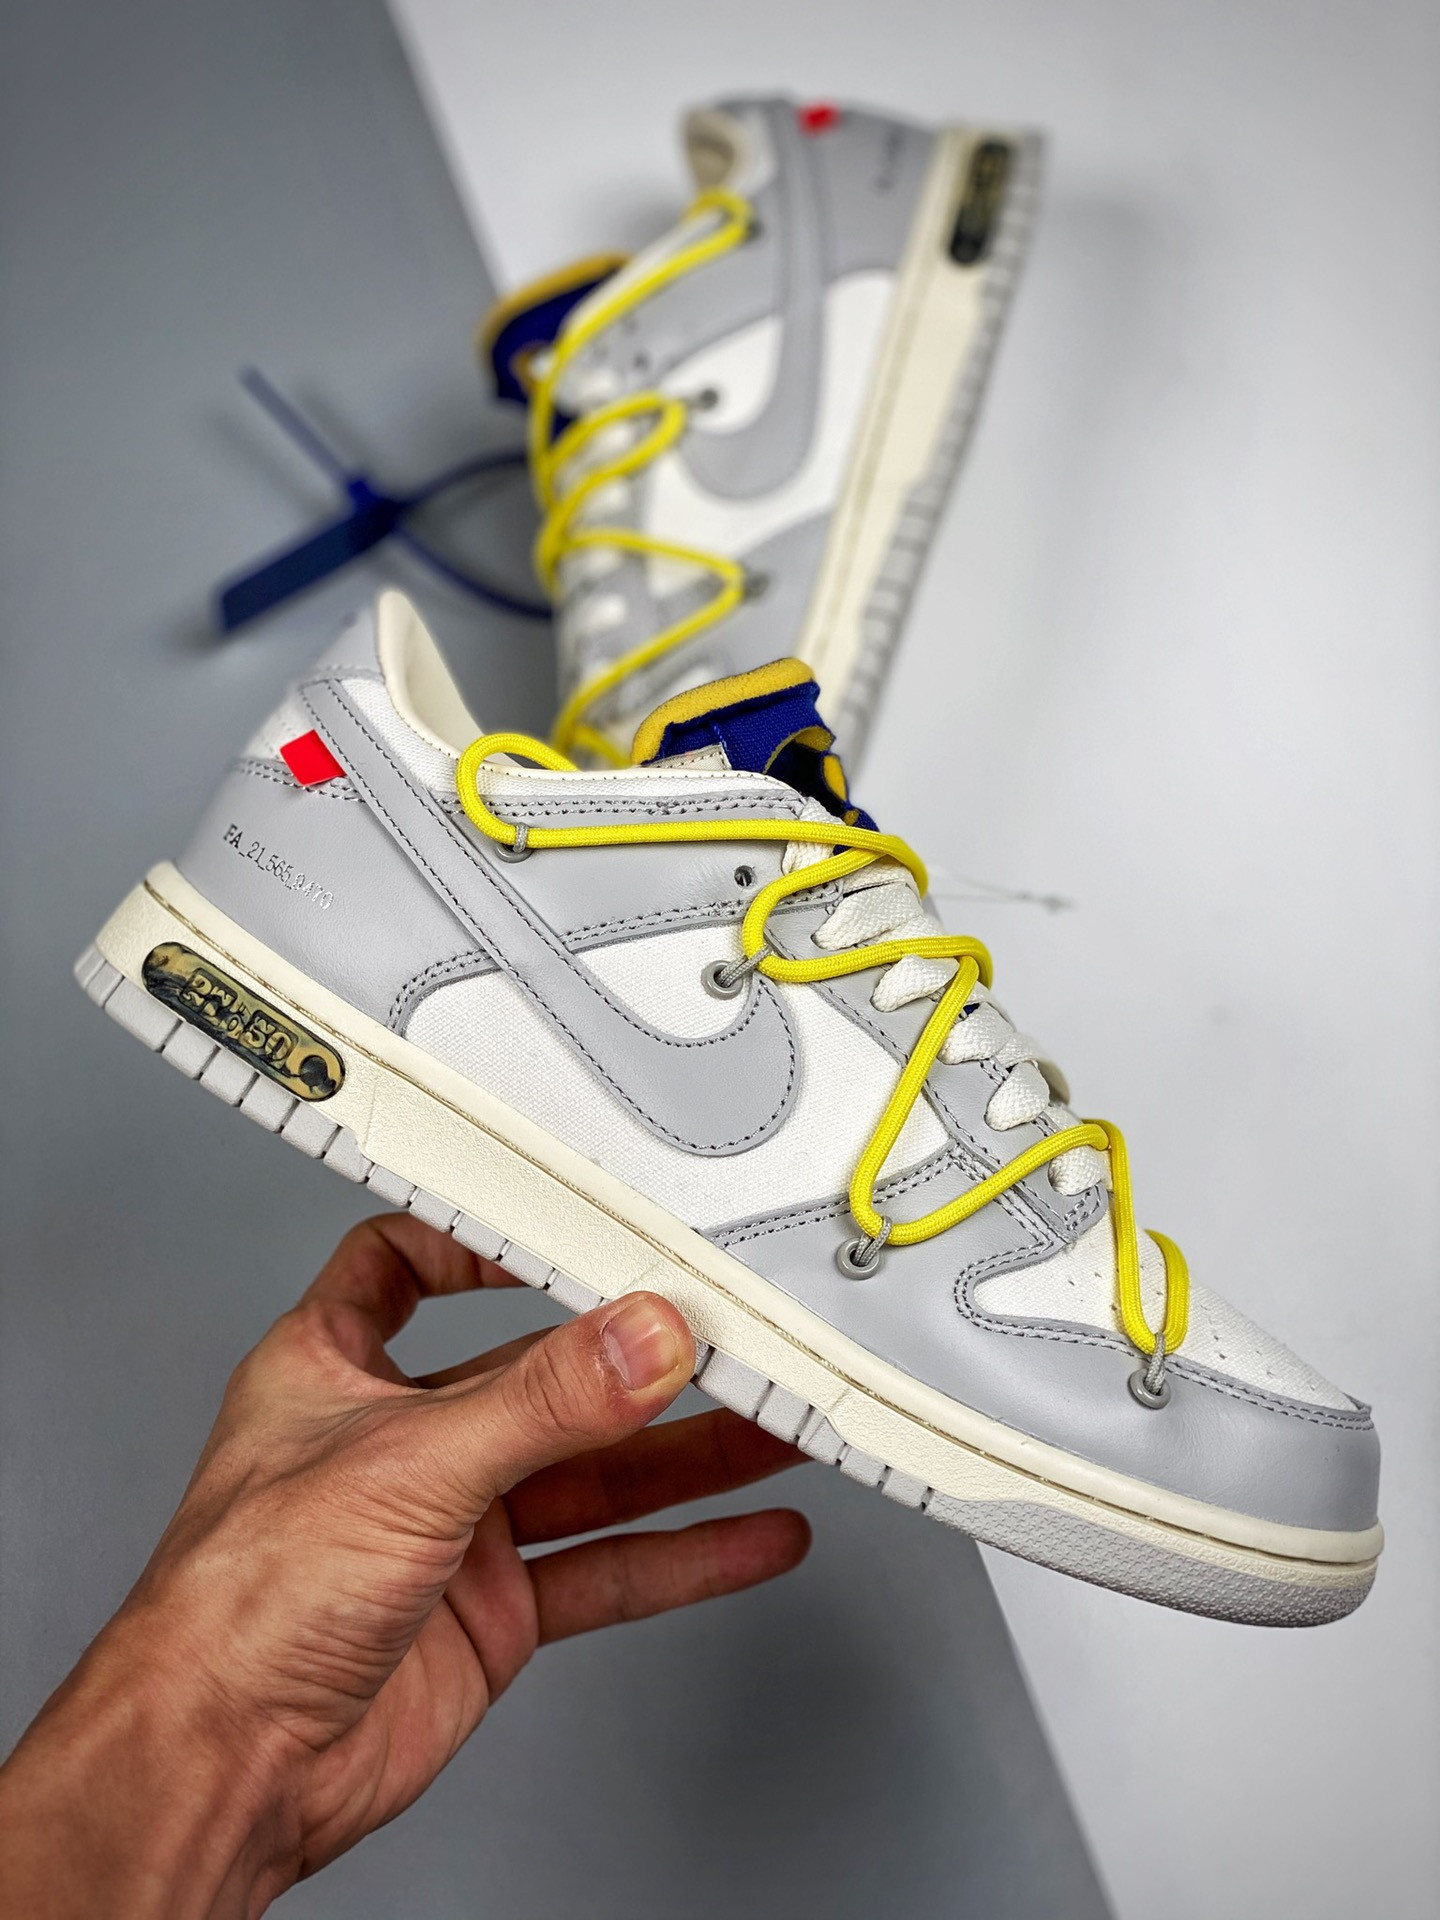 Off-White x Nike Dunk Low 27 of 50 Sail Grey For Sale